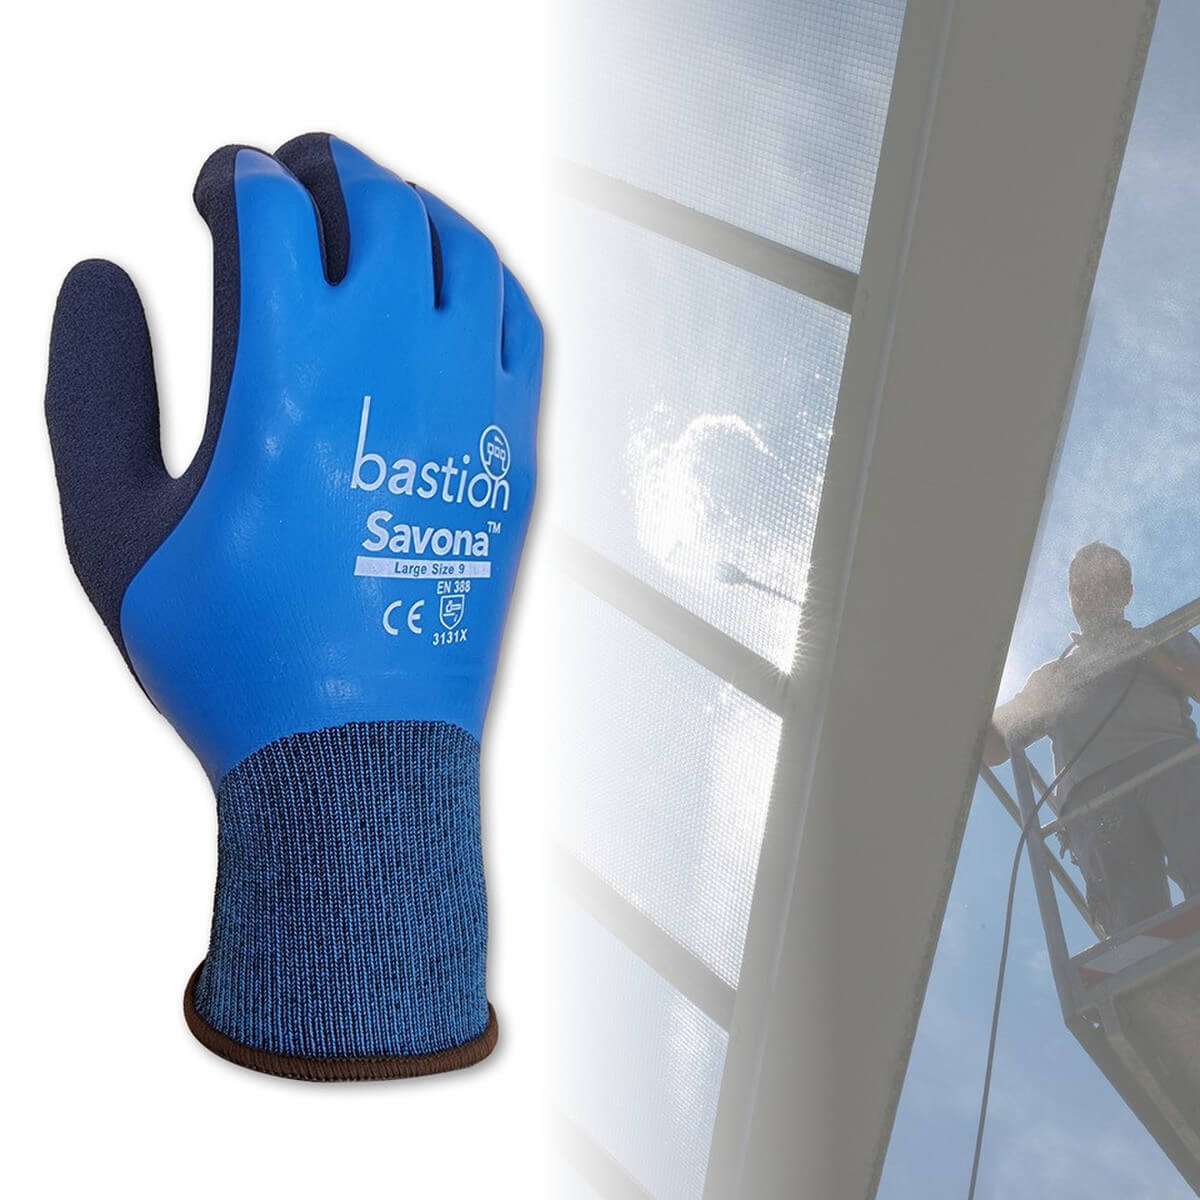 Bastion Savona Fluid Resistant Safety Gloves used by a roofing contractor